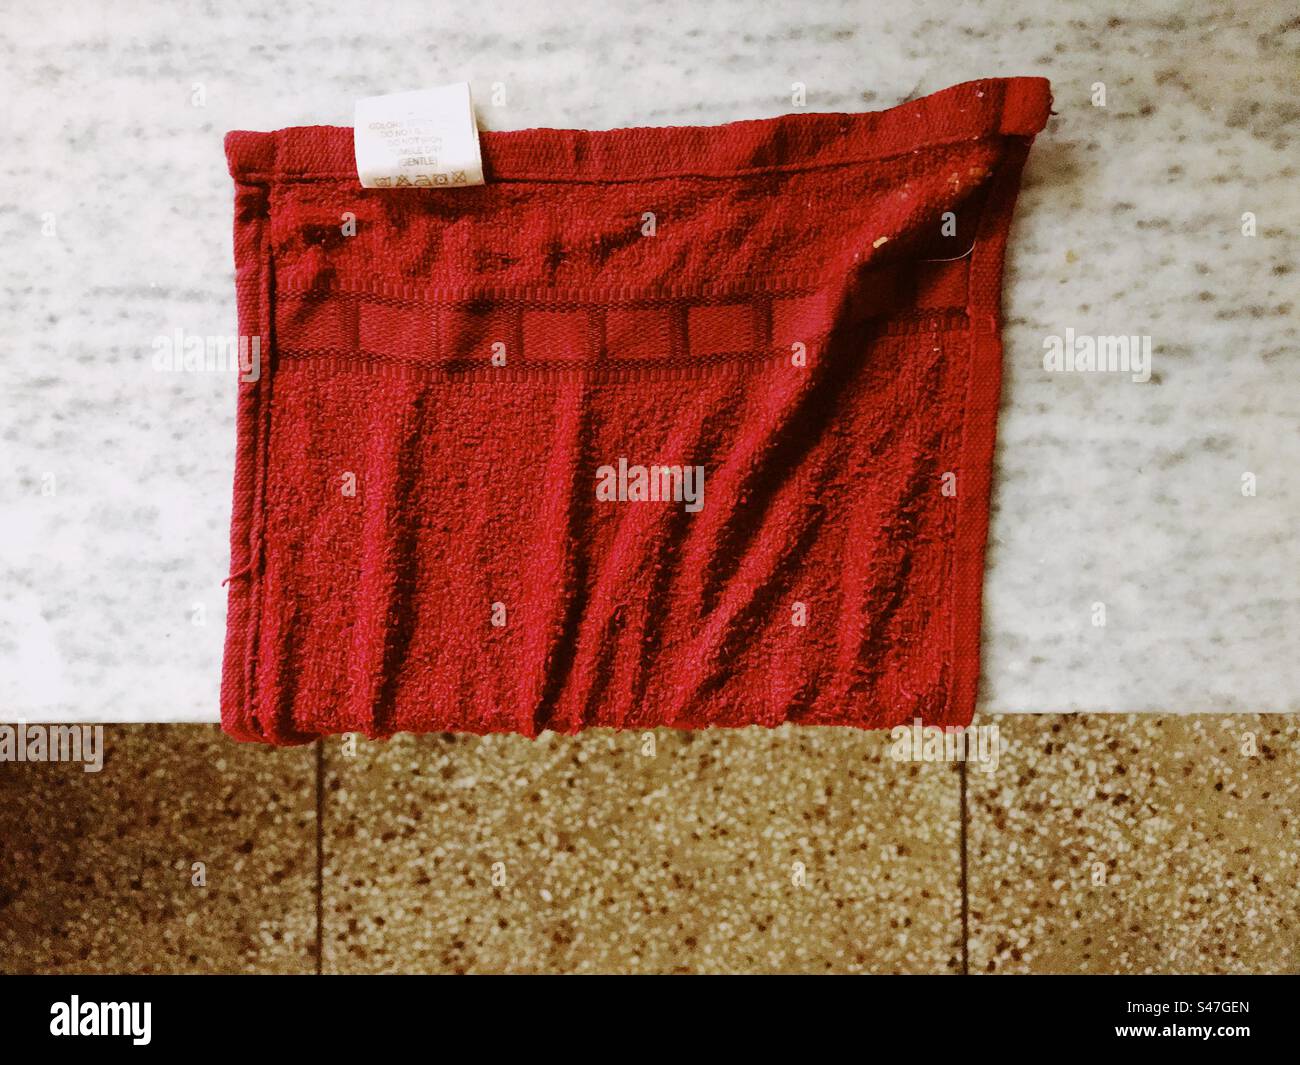 A top view of a wet red towel Stock Photo